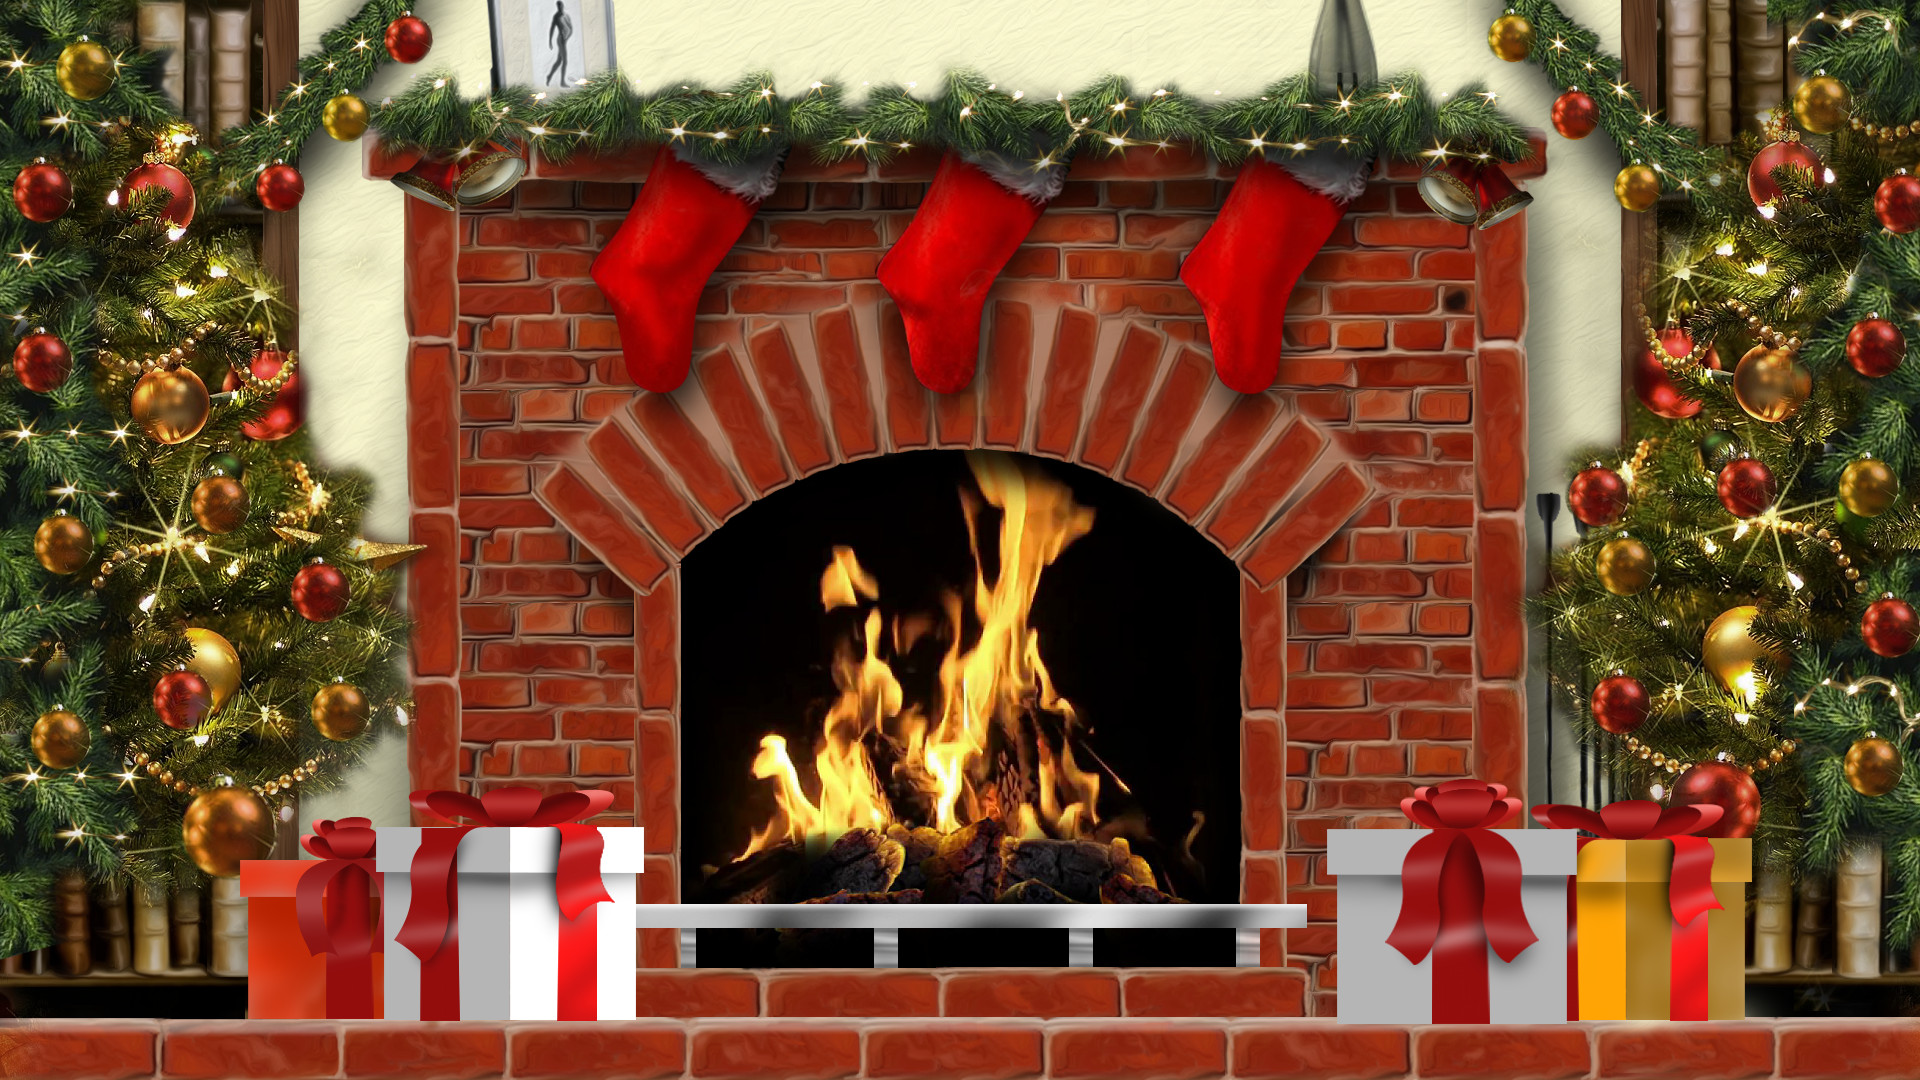 Christmas Fireplace Pics
 Amazing Christmas Fireplaces App Ranking and Store Data